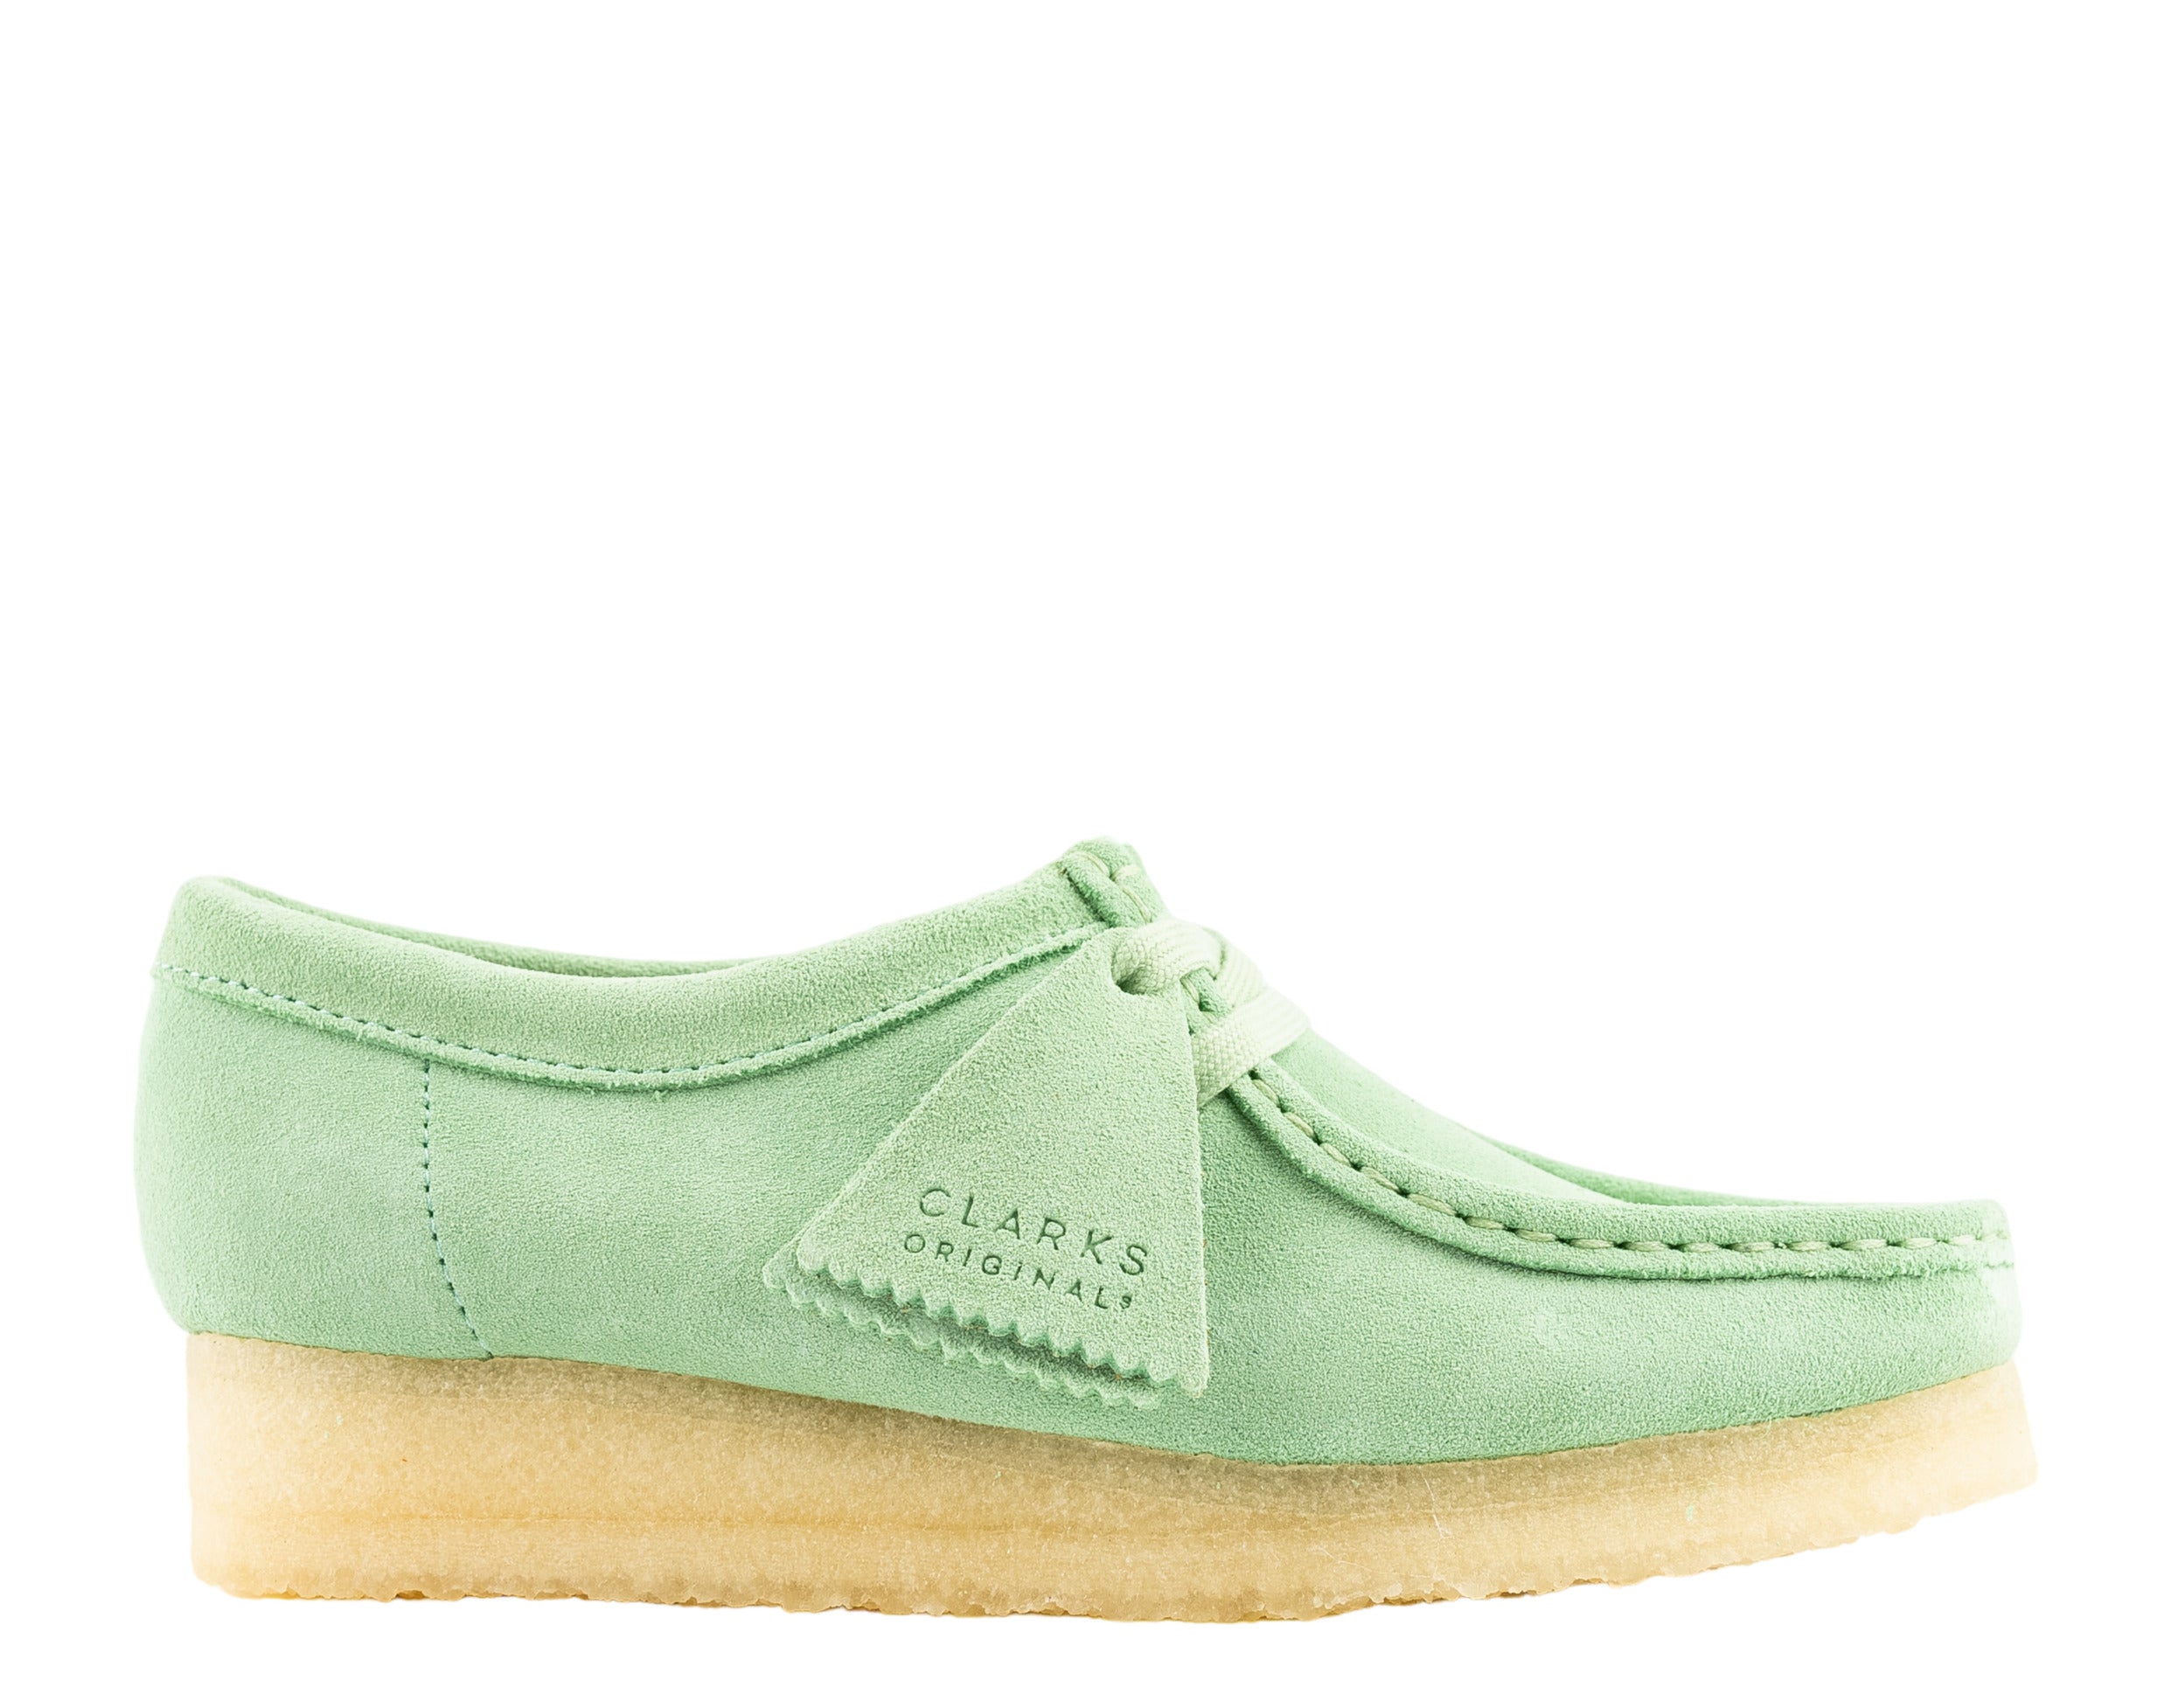 Clarks Originals Wallabee Women's Casual Shoes – NYCMode